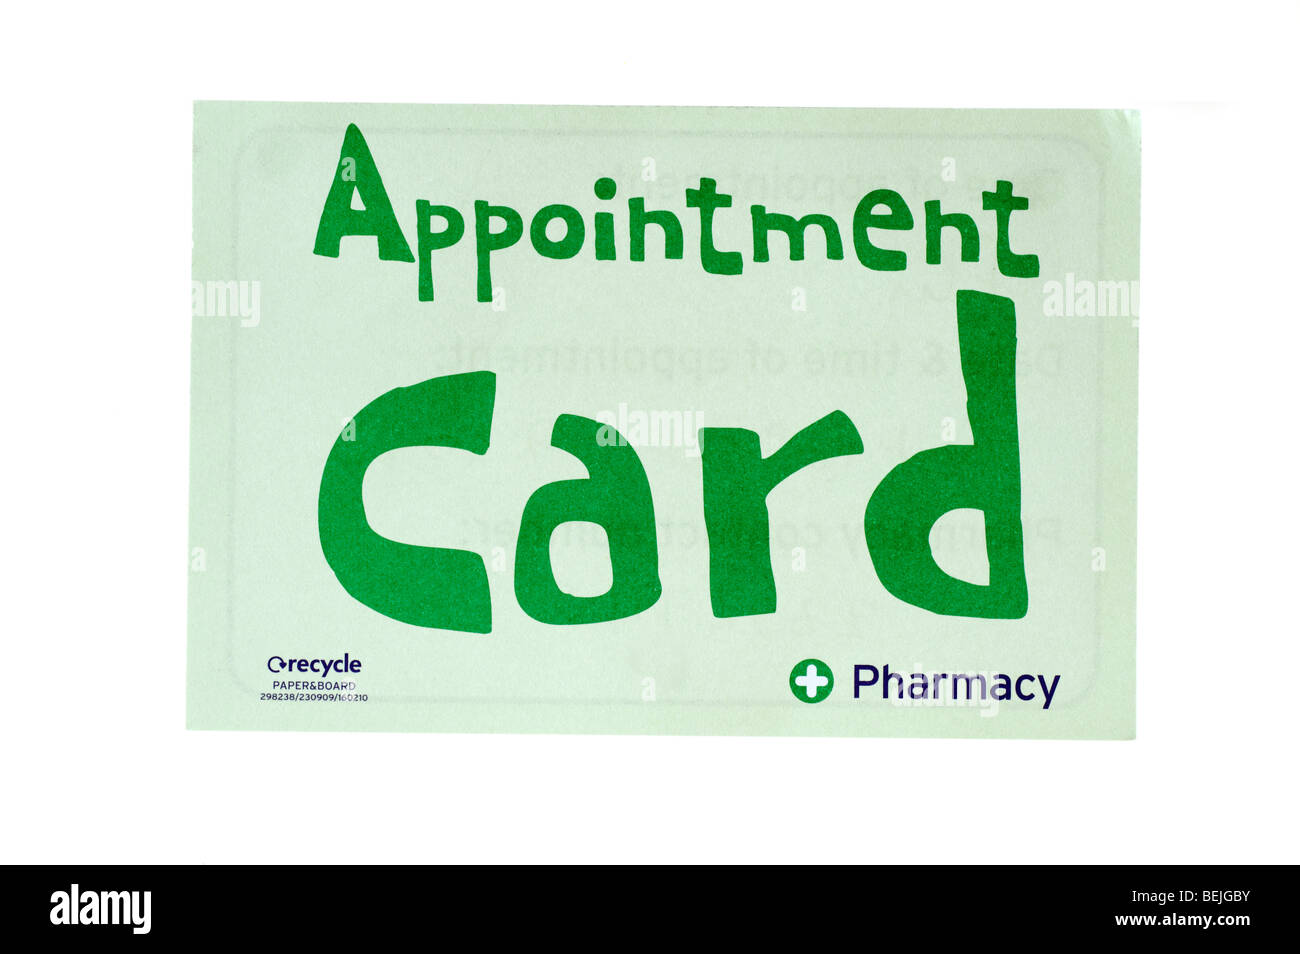 Green Pharmacy Appointment Card on recycled card Stock Photo